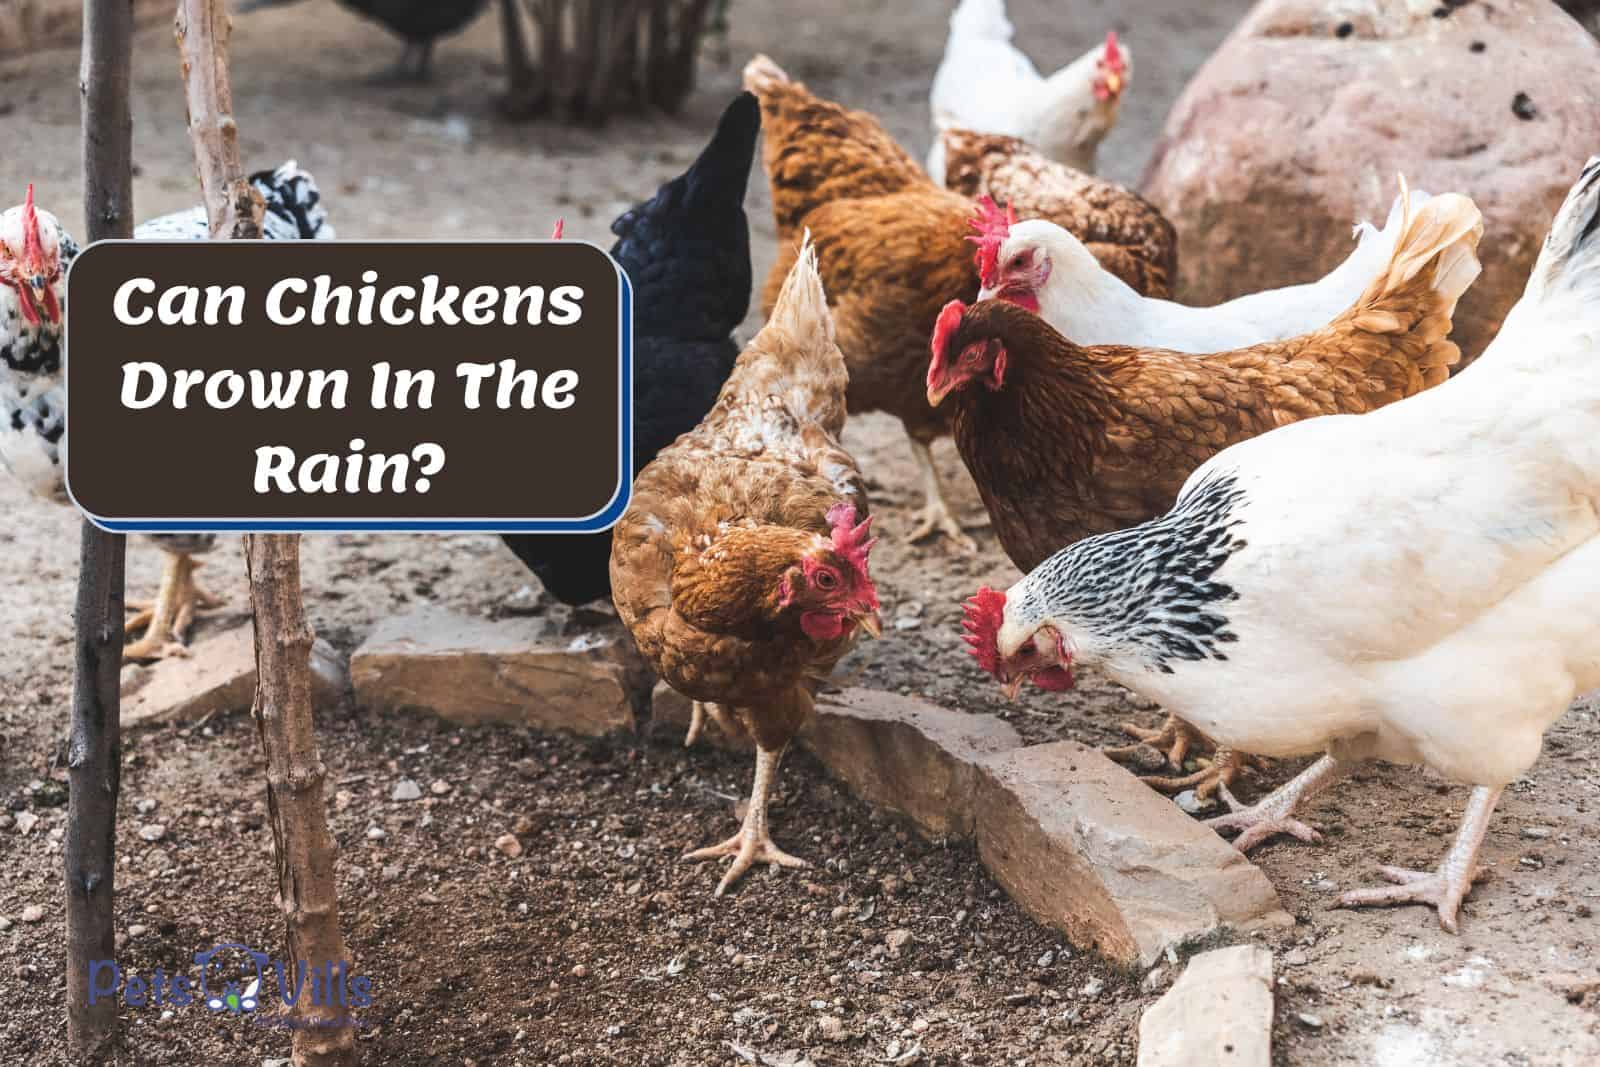 chickens roaming around looking for food but Can Chickens Drown In The Rain?